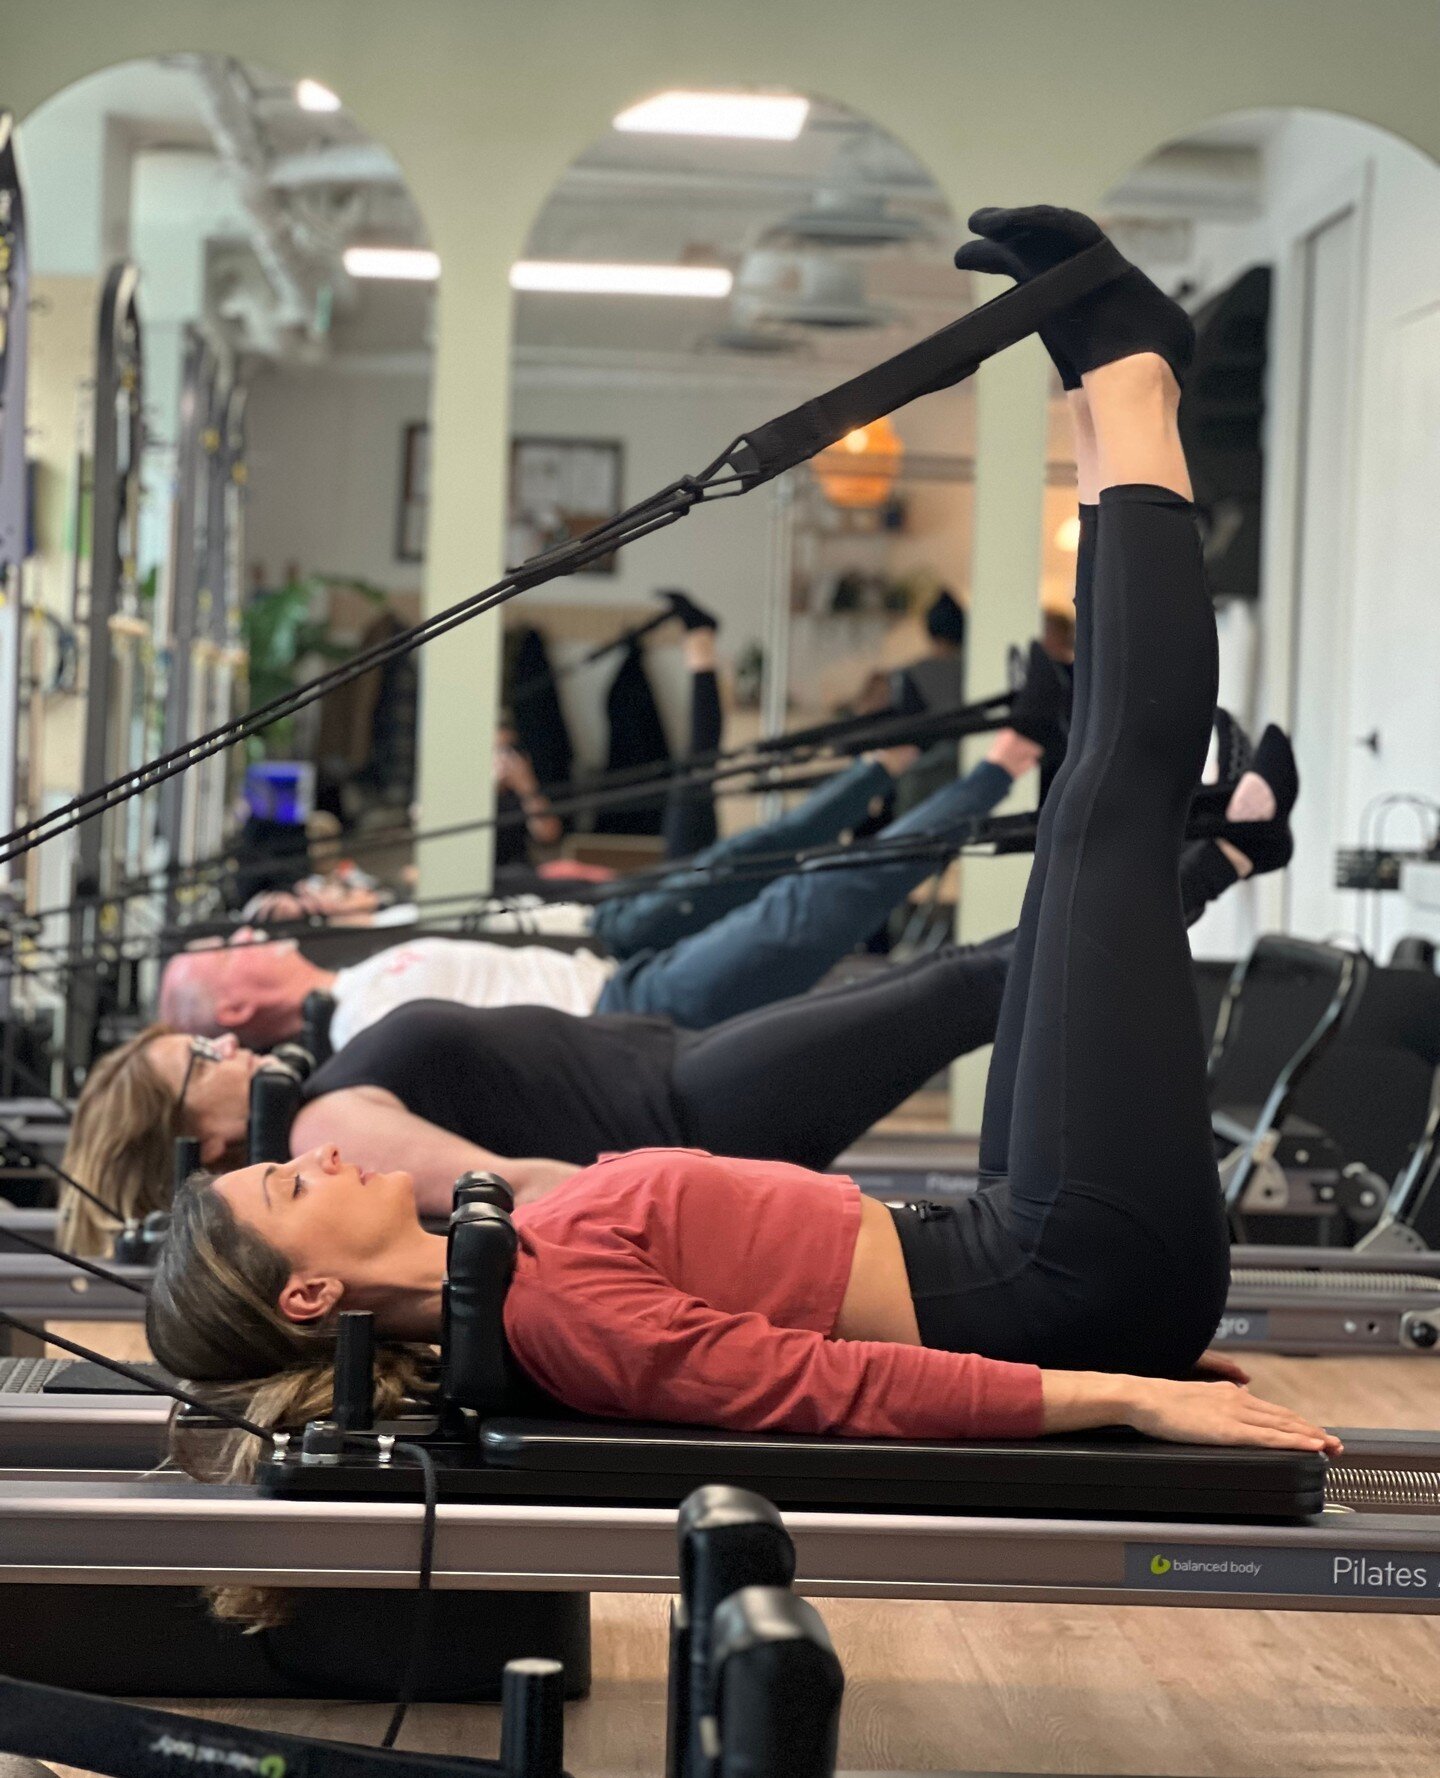 Did you know, the original machine used in pilates was called the Magic Circle? It was originally constructed from the steel bands that come on beer kegs.